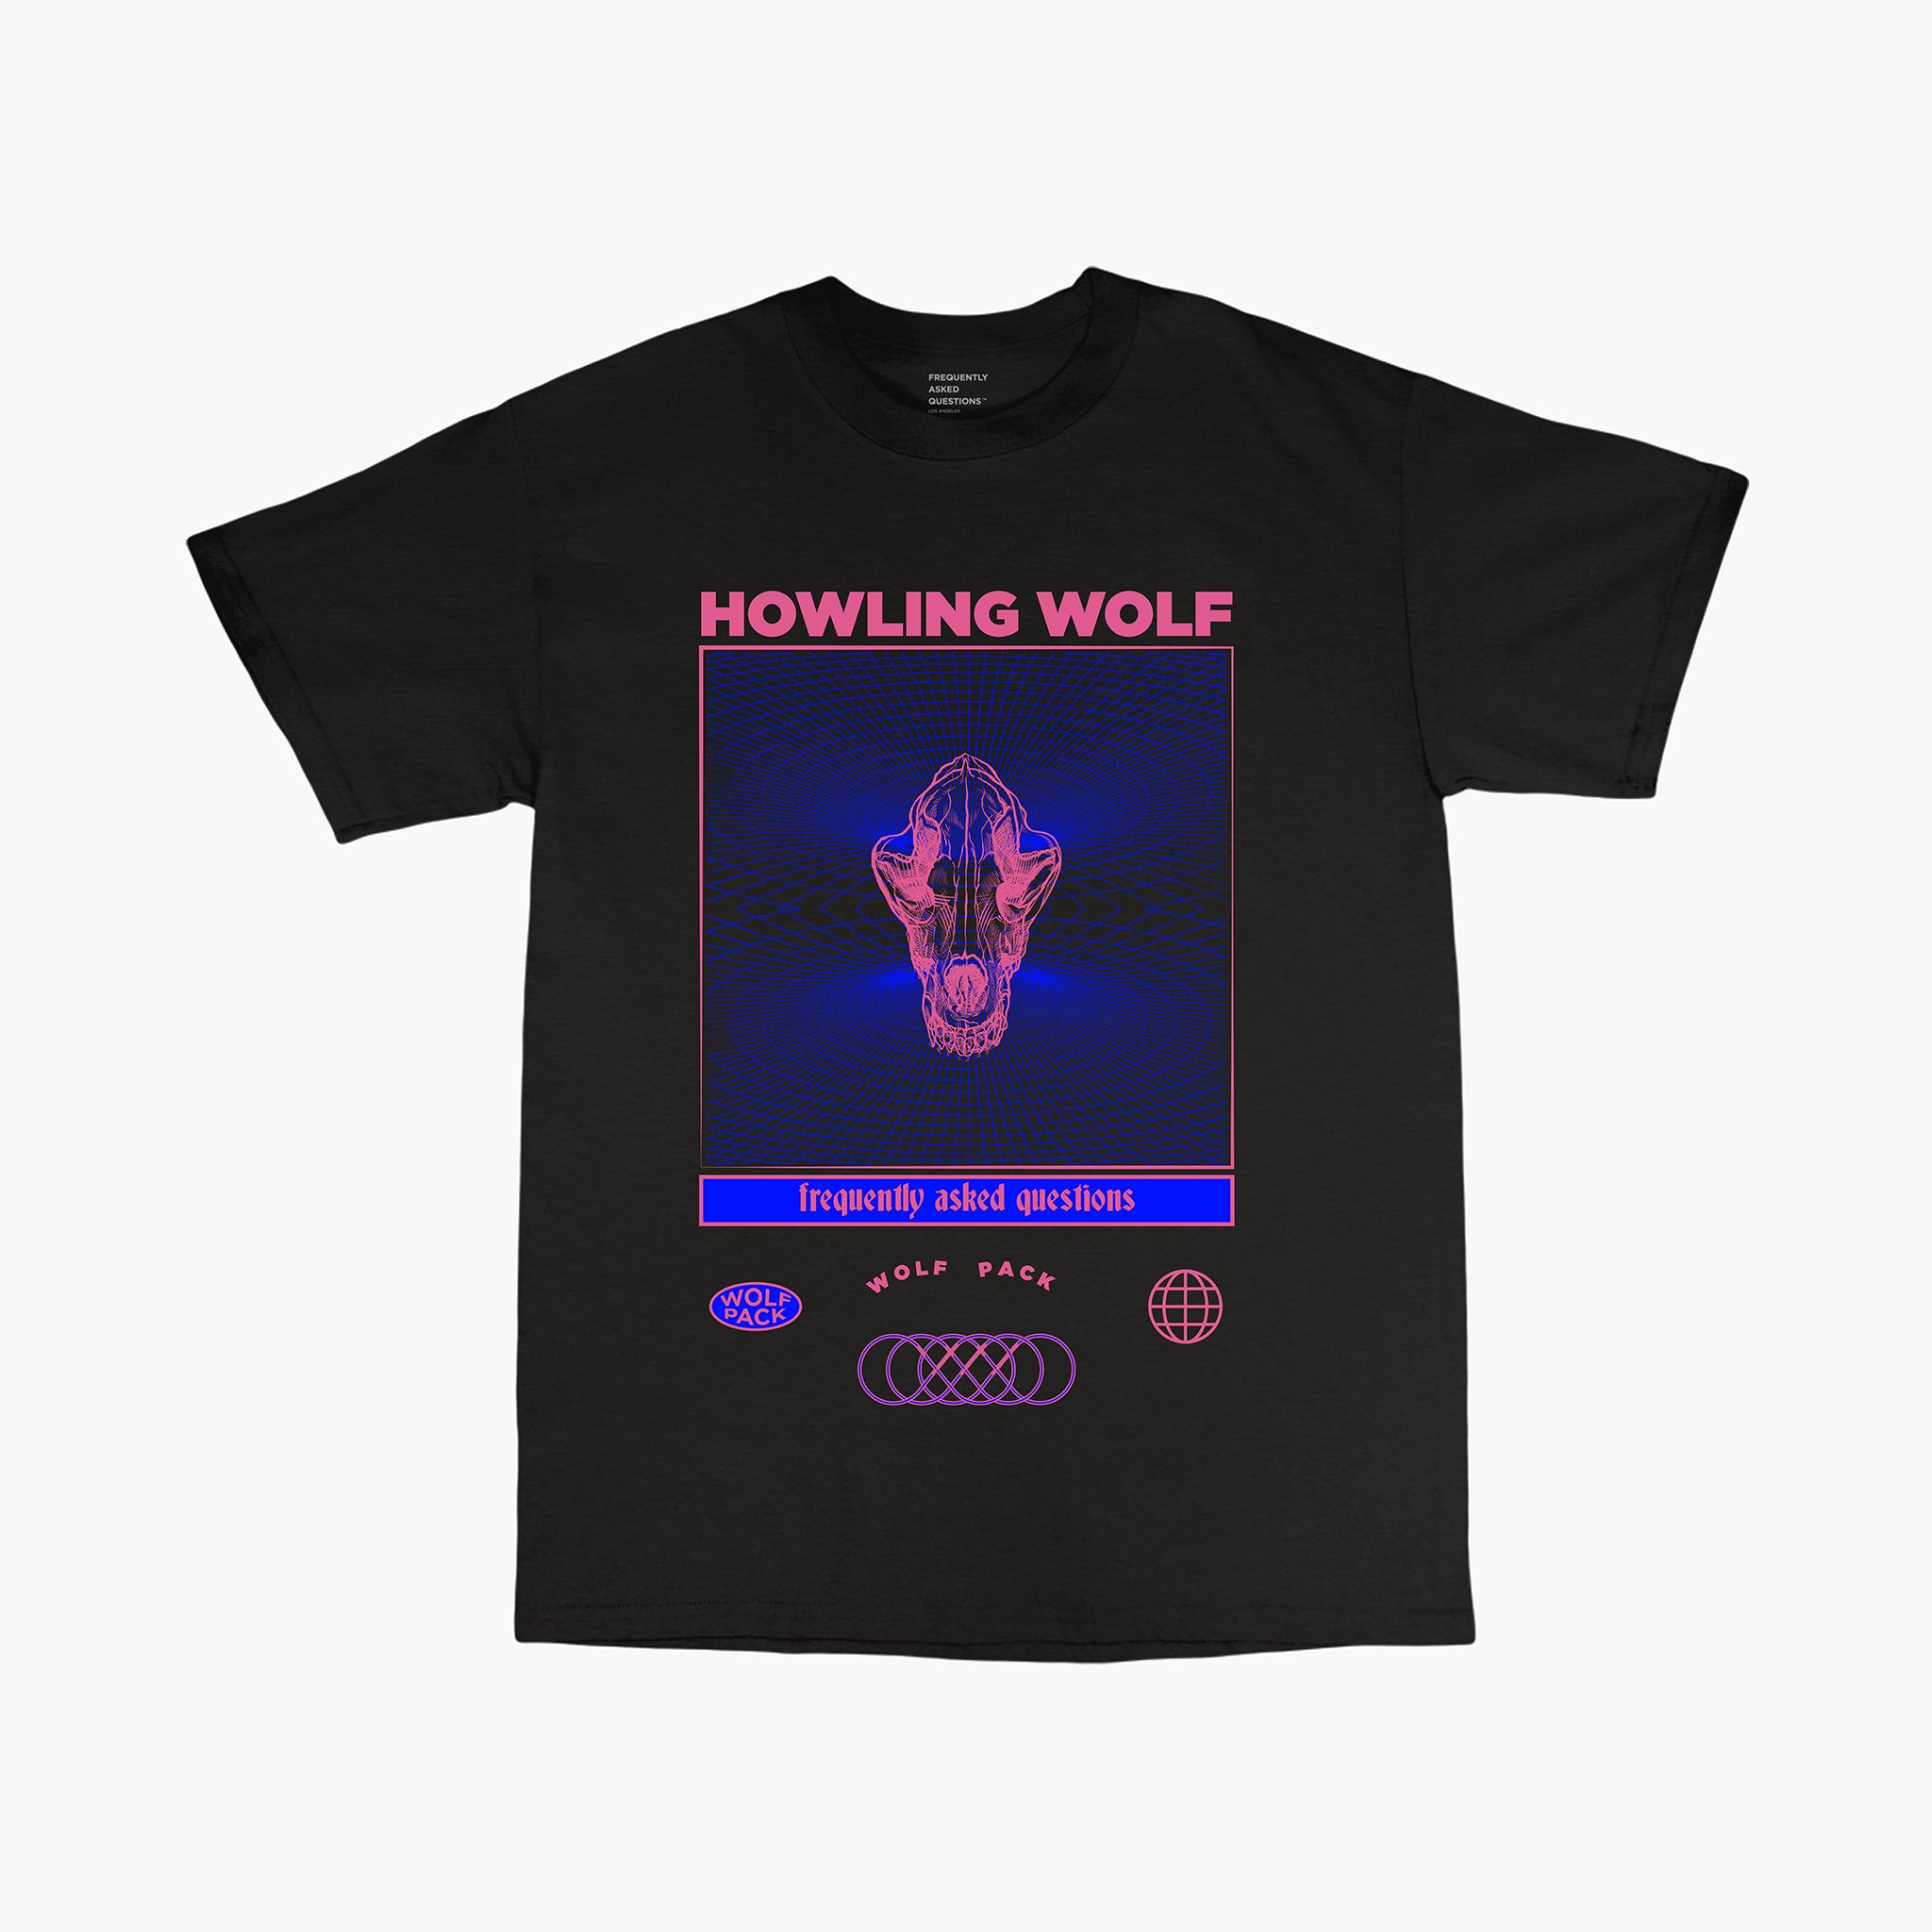 Howling Wolf T-Shirt - Frequently Asked Questions